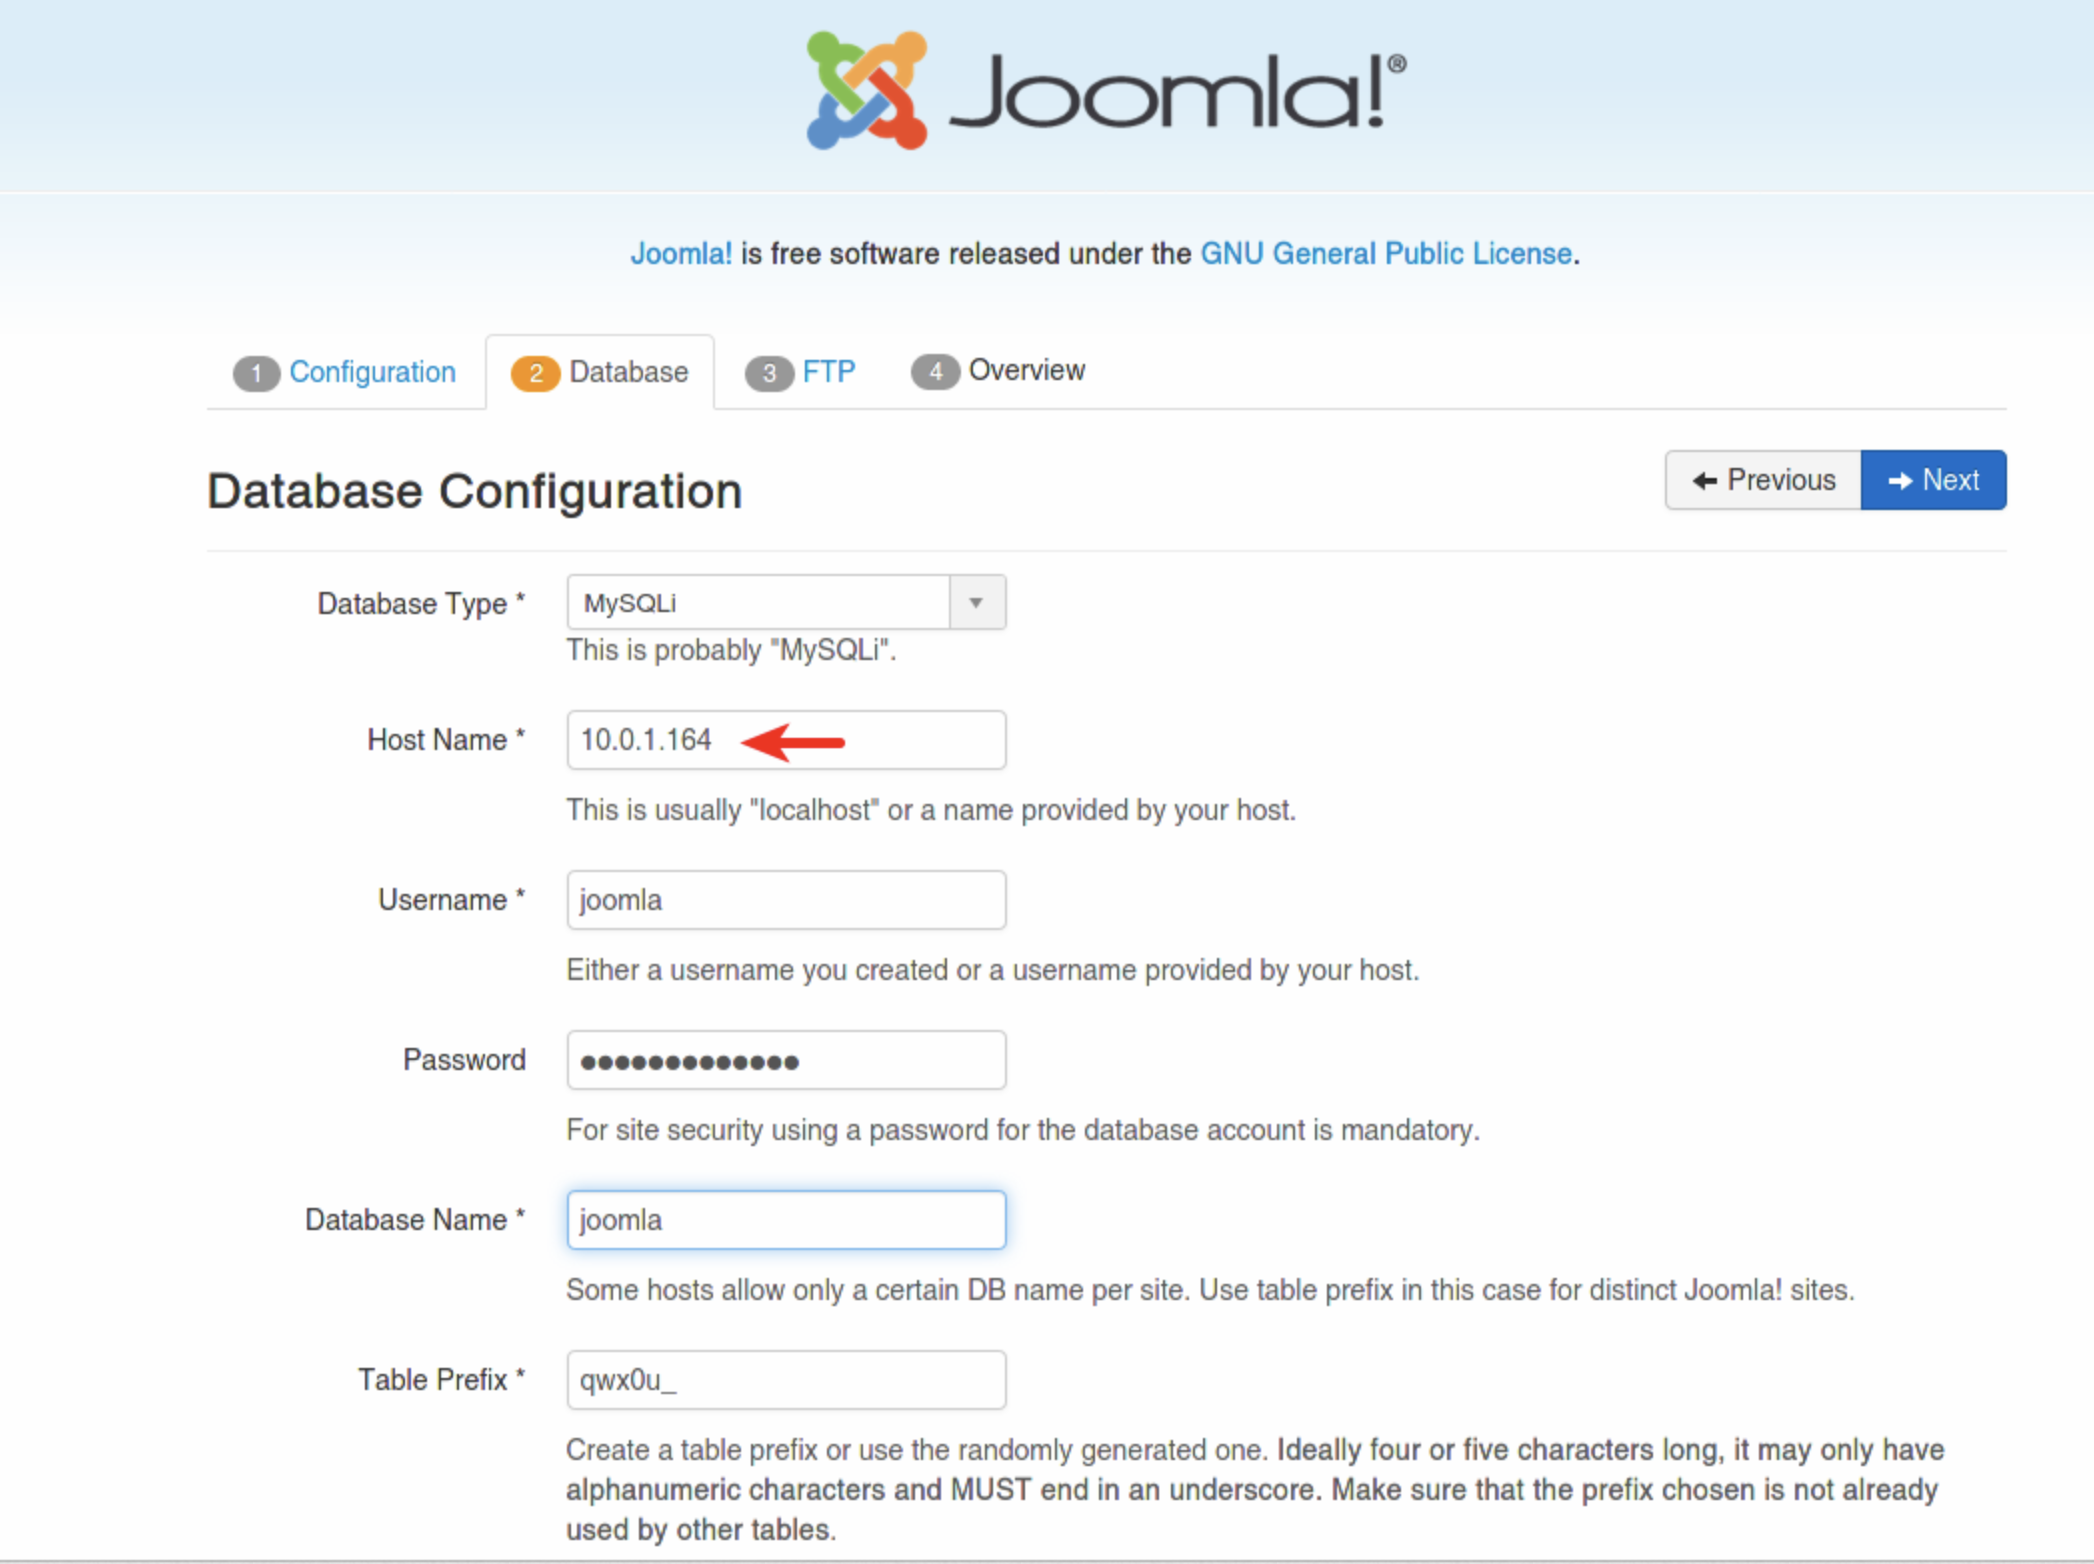 Joomla's Database Configuration window with complete forms, including database name and table prefix, and username, among other fields